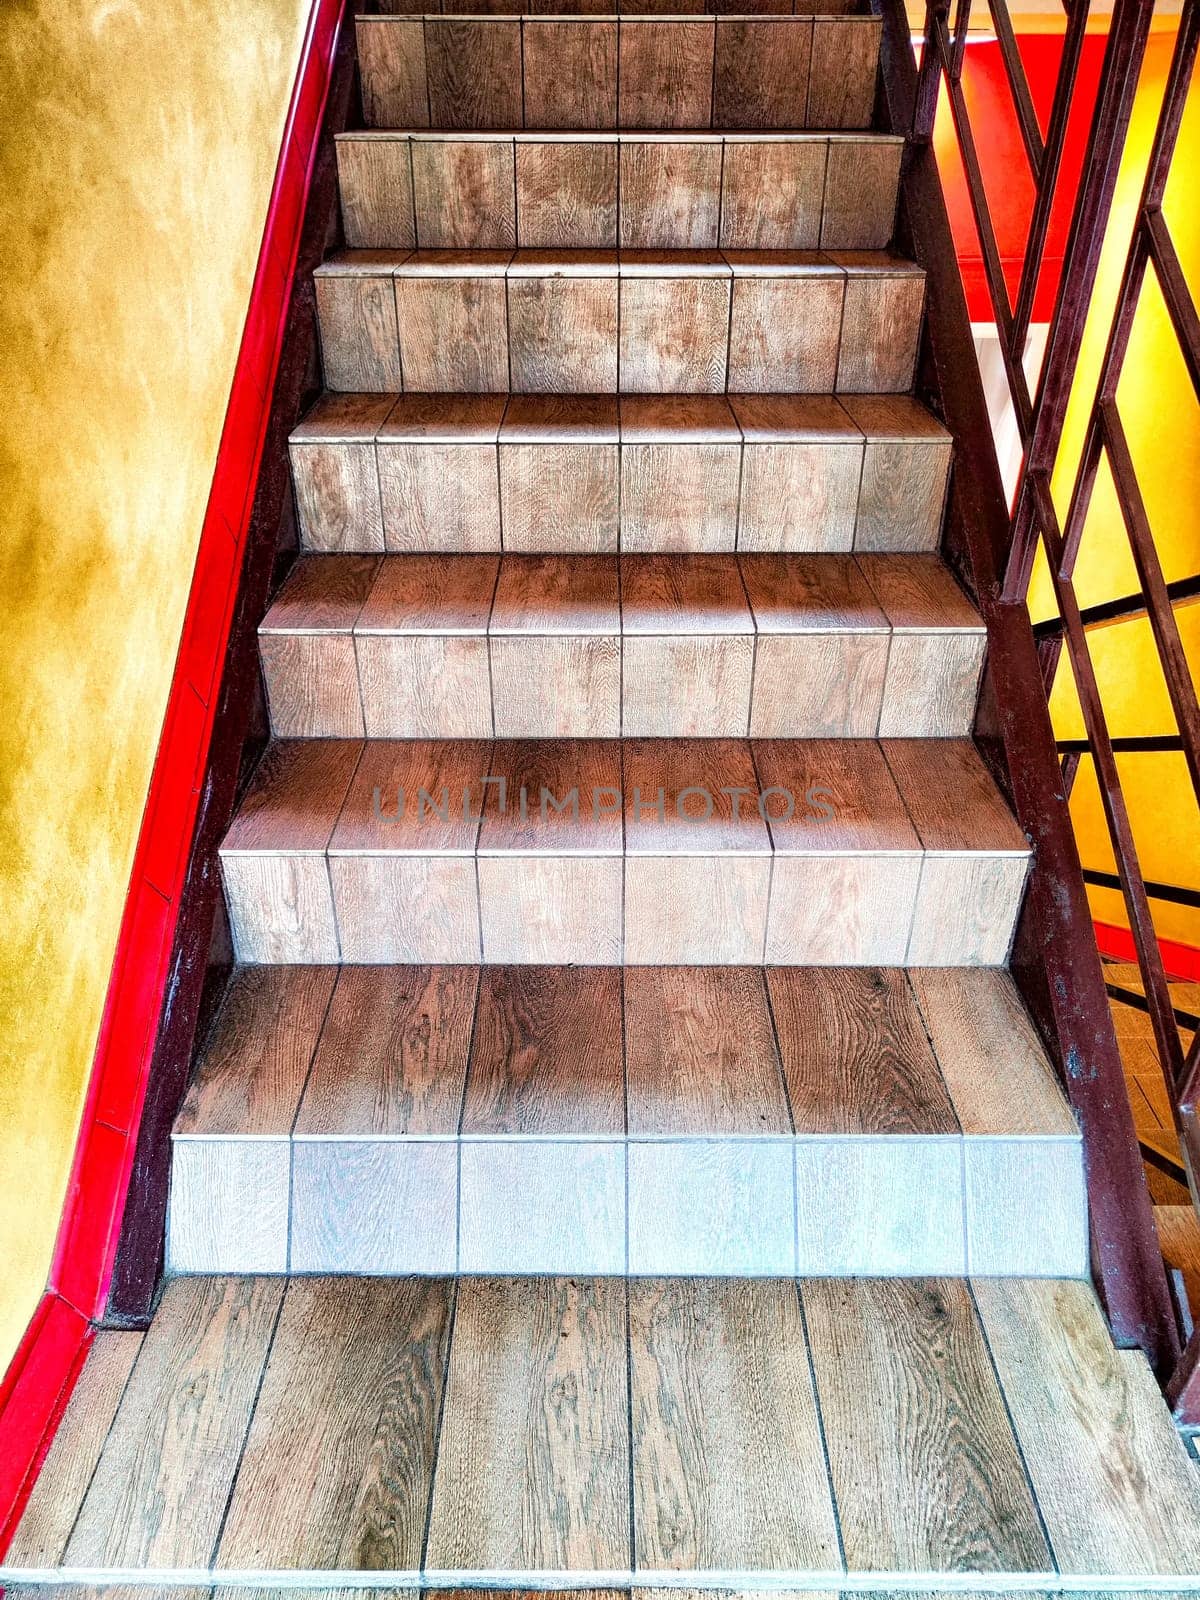 Warmly Lit Wooden Staircase With Red Handrails. Staircase with wooden steps and bright red handrails